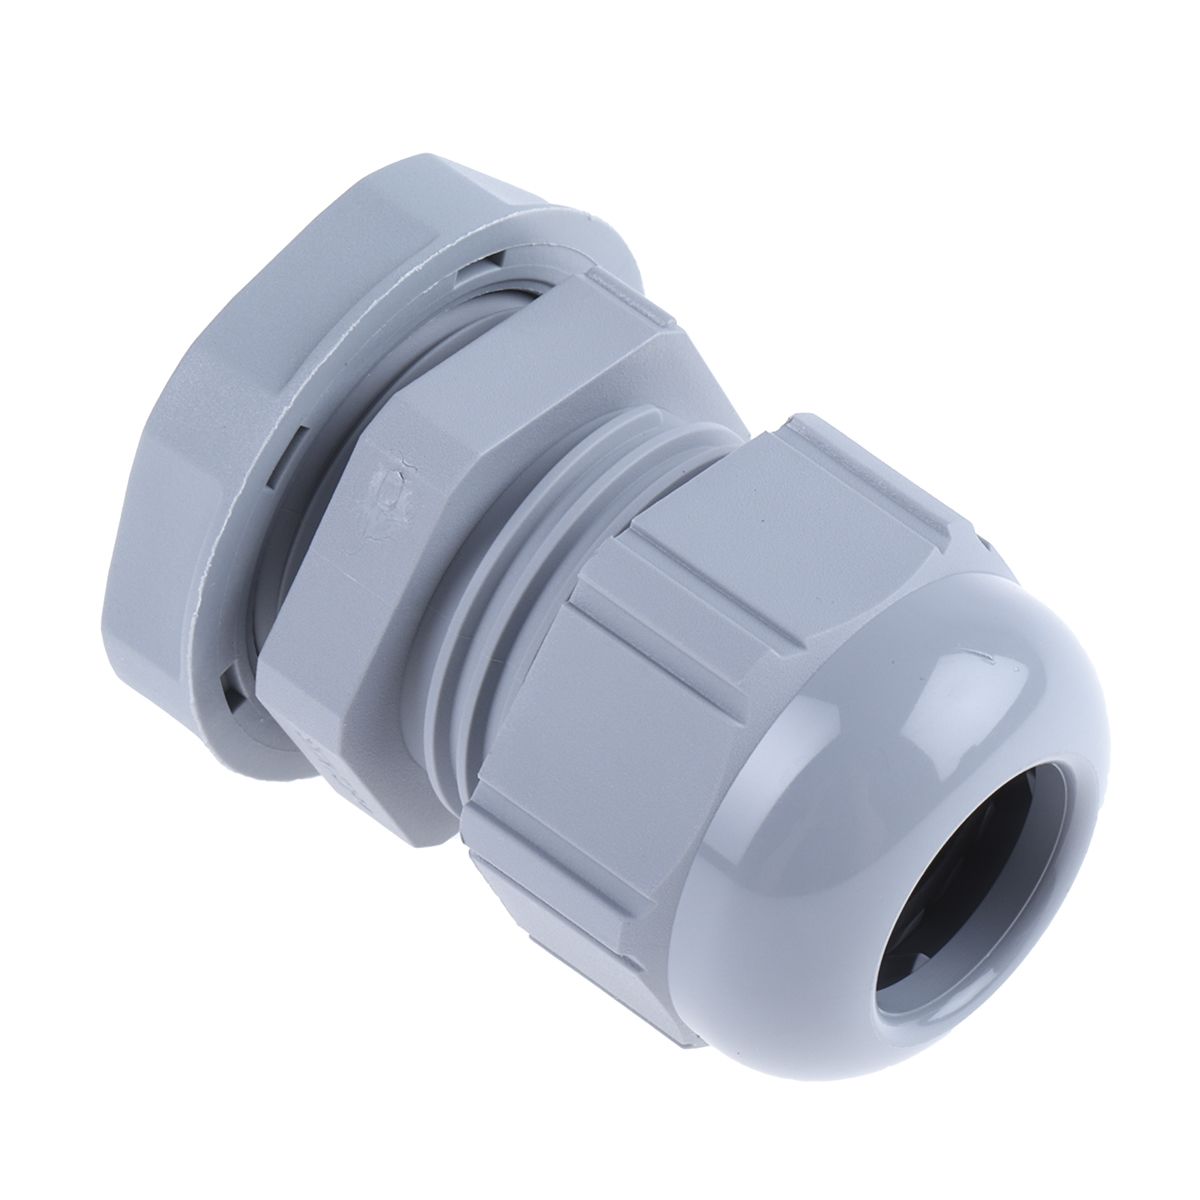 Lapp SKINTOP Series Grey Polyamide Cable Gland, PG13.5 Thread, 6mm Min, 12mm Max, IP68